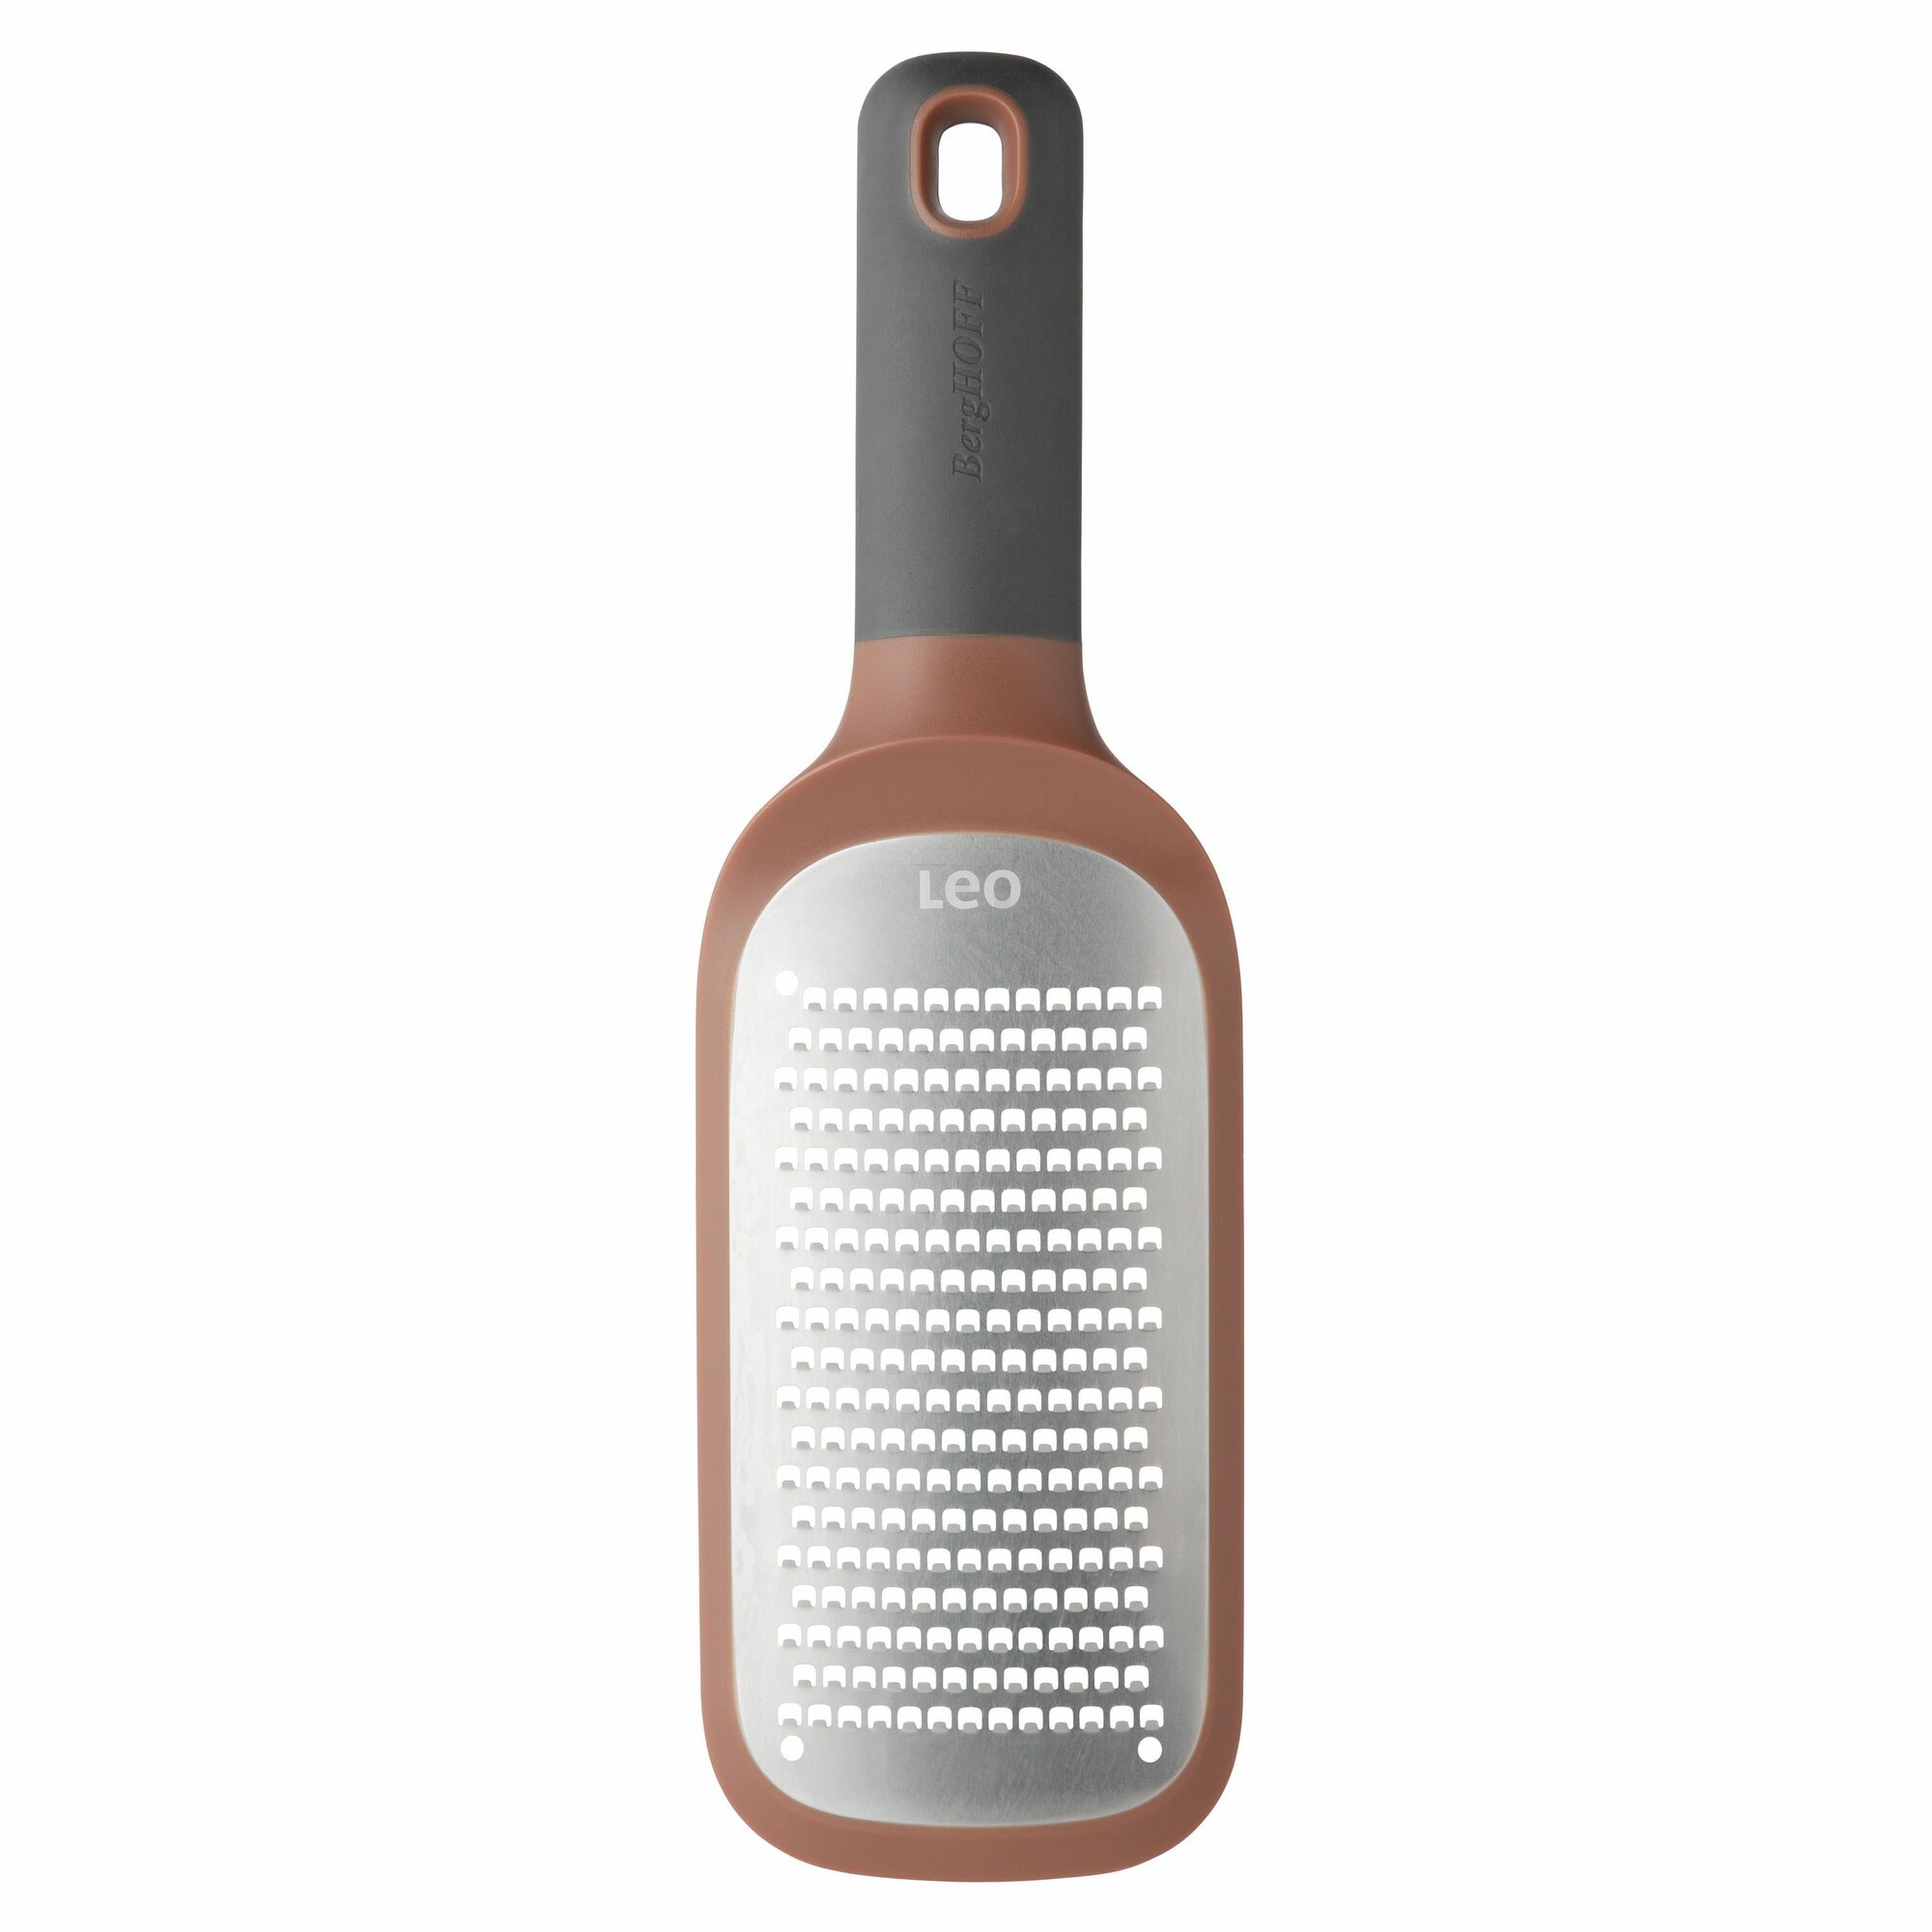 Coarse paddle grater  BergHOFF Official Website